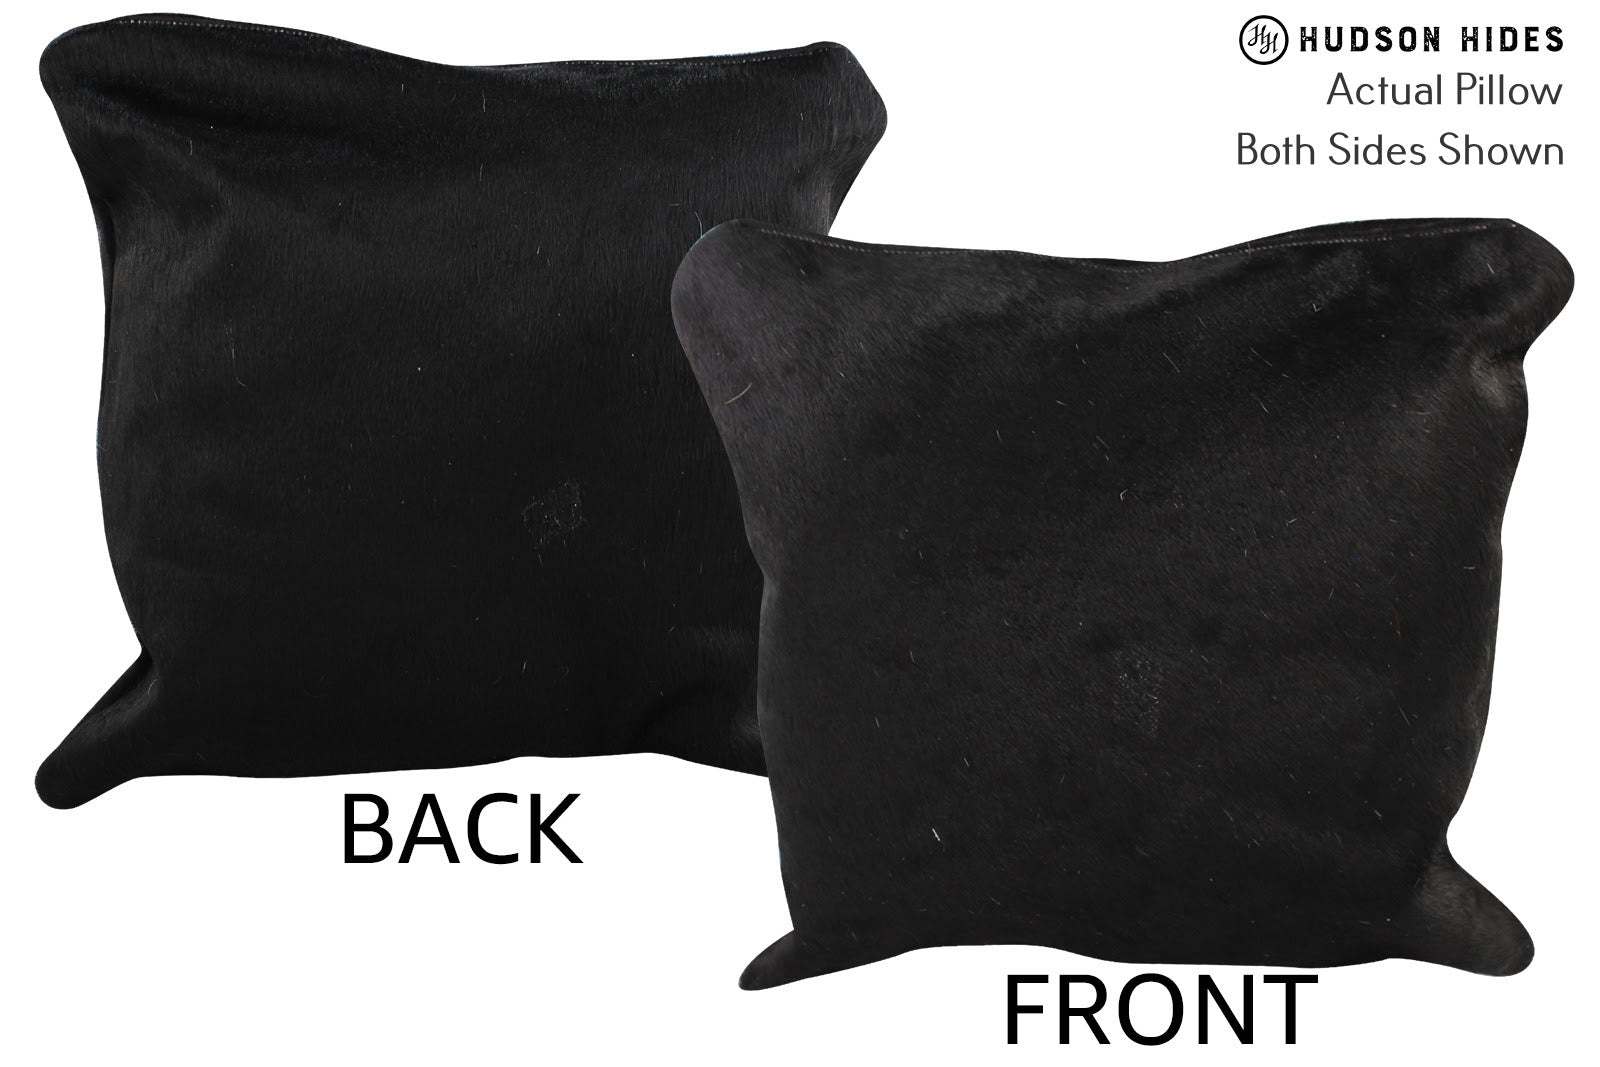 Solid Black Cowhide Pillow #74466